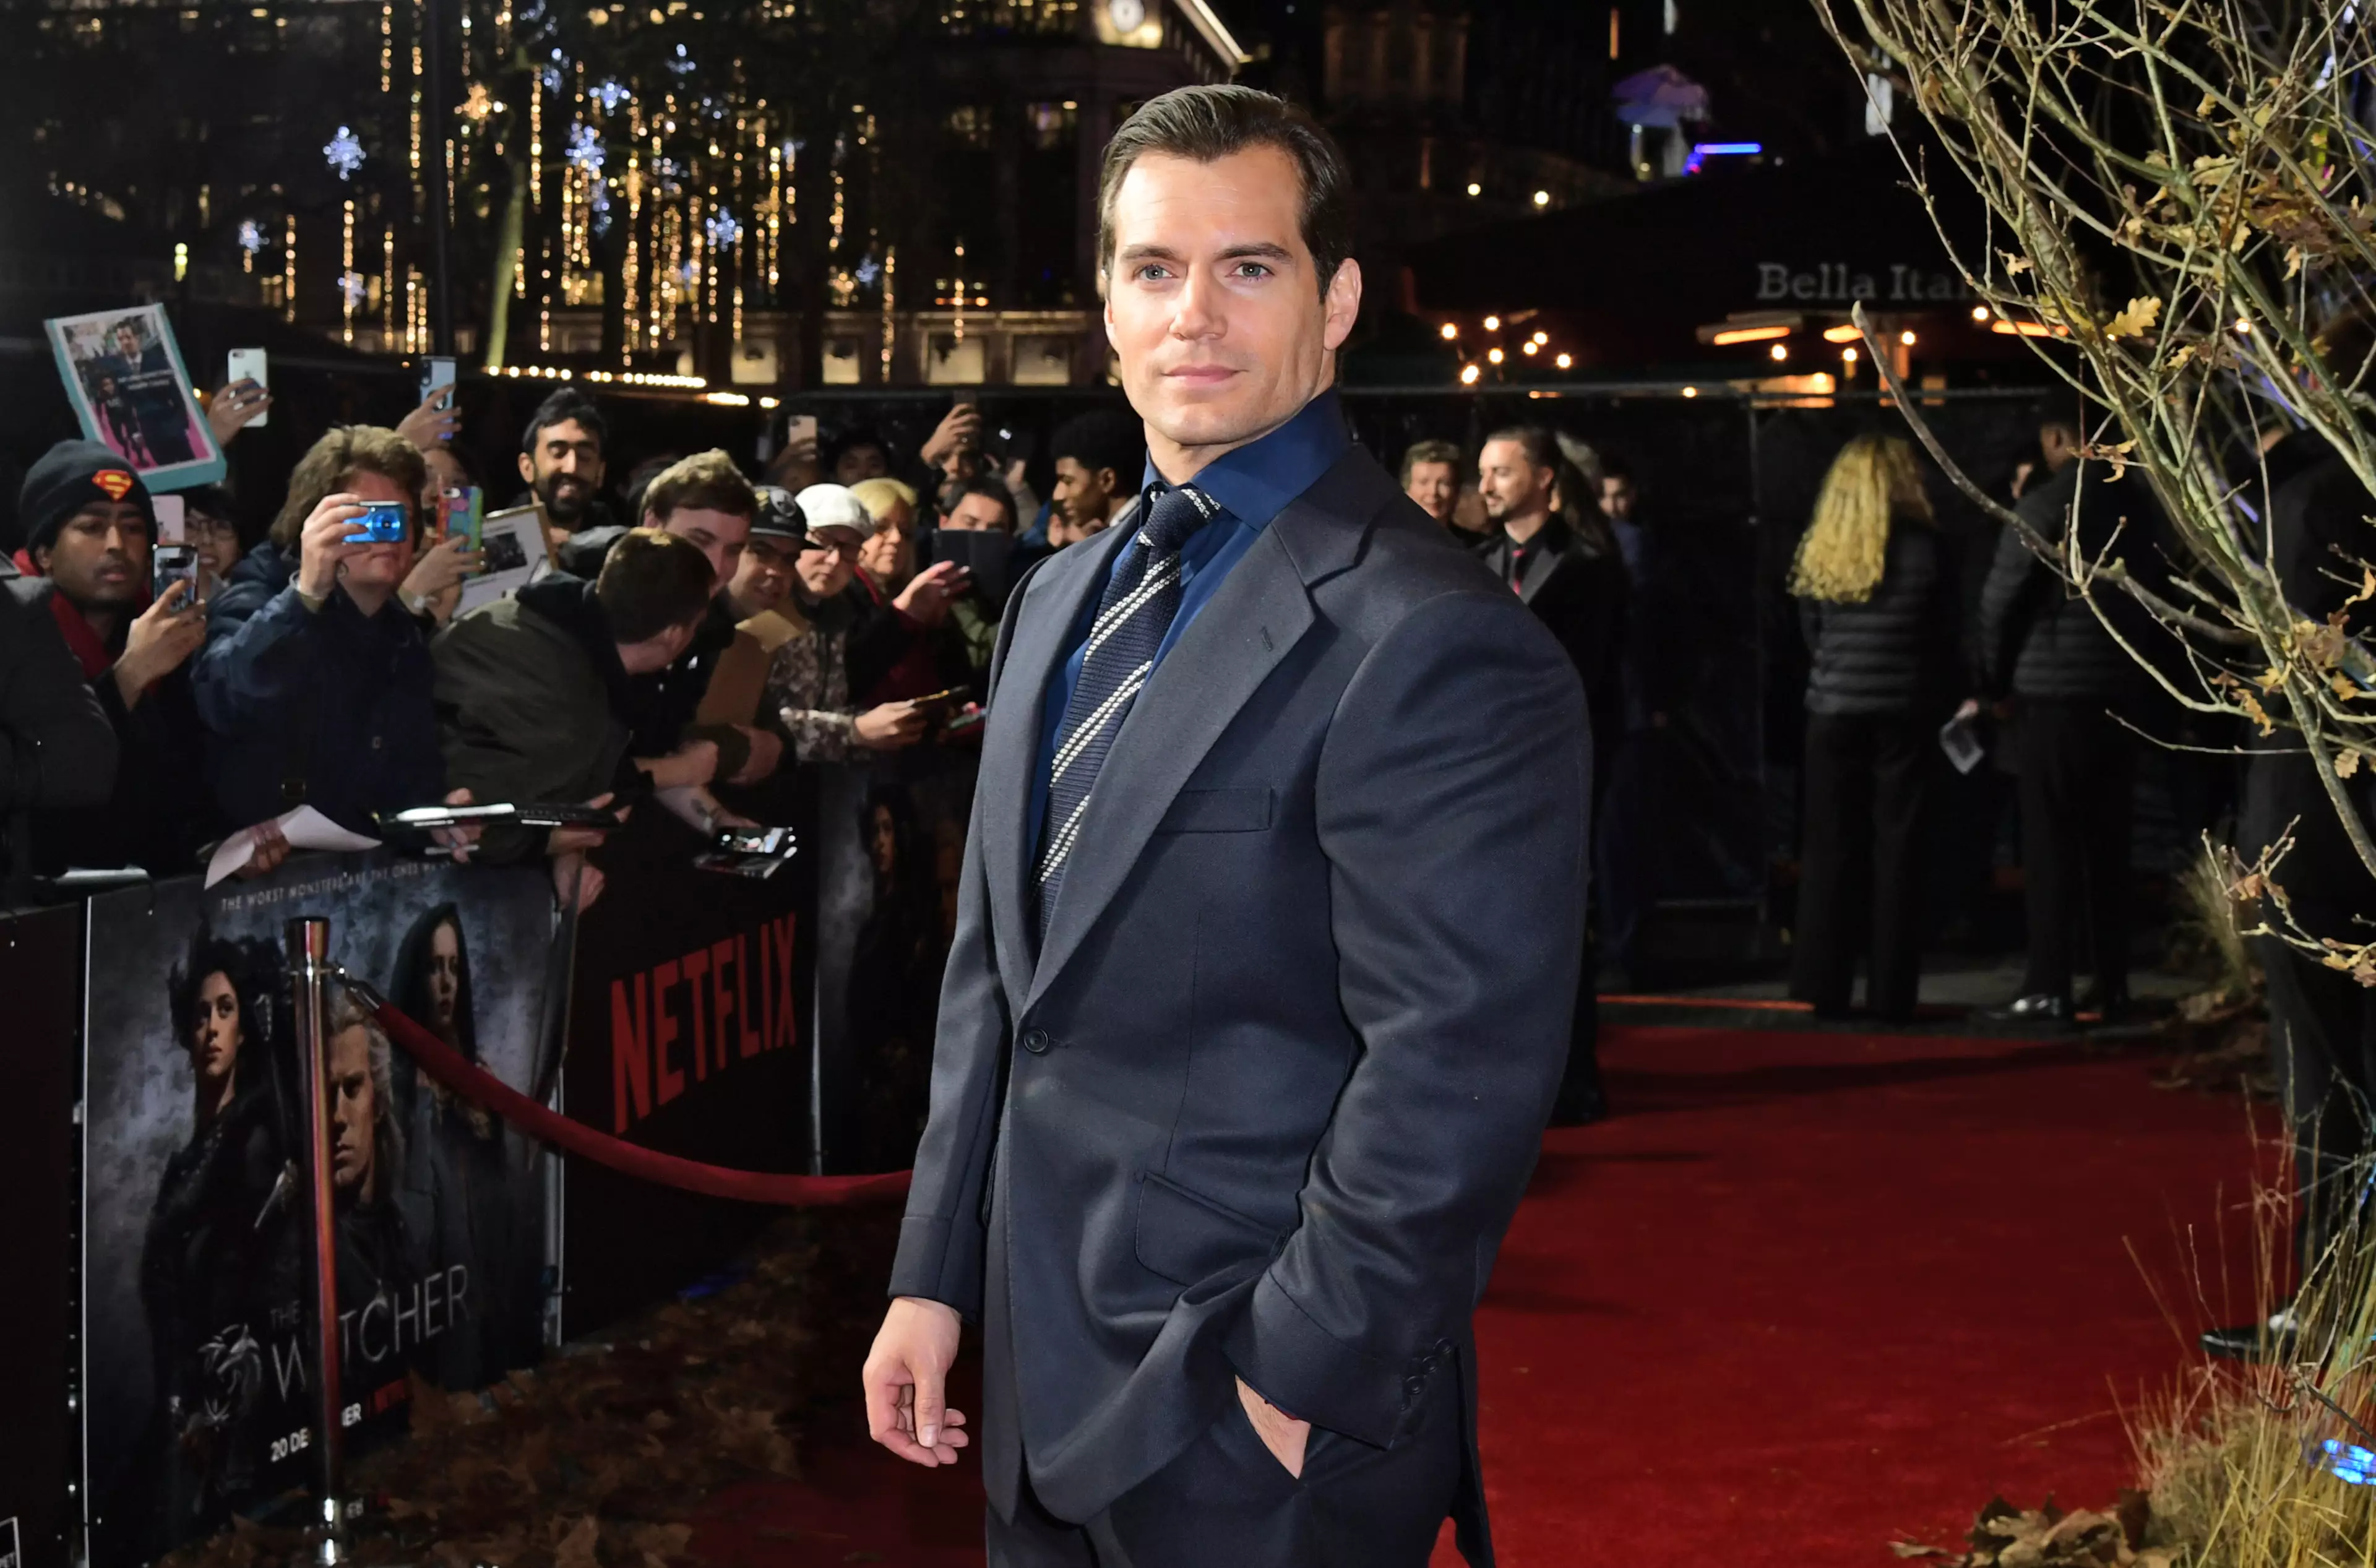 Henry Cavill at the premiere of The Witcher in London last year (